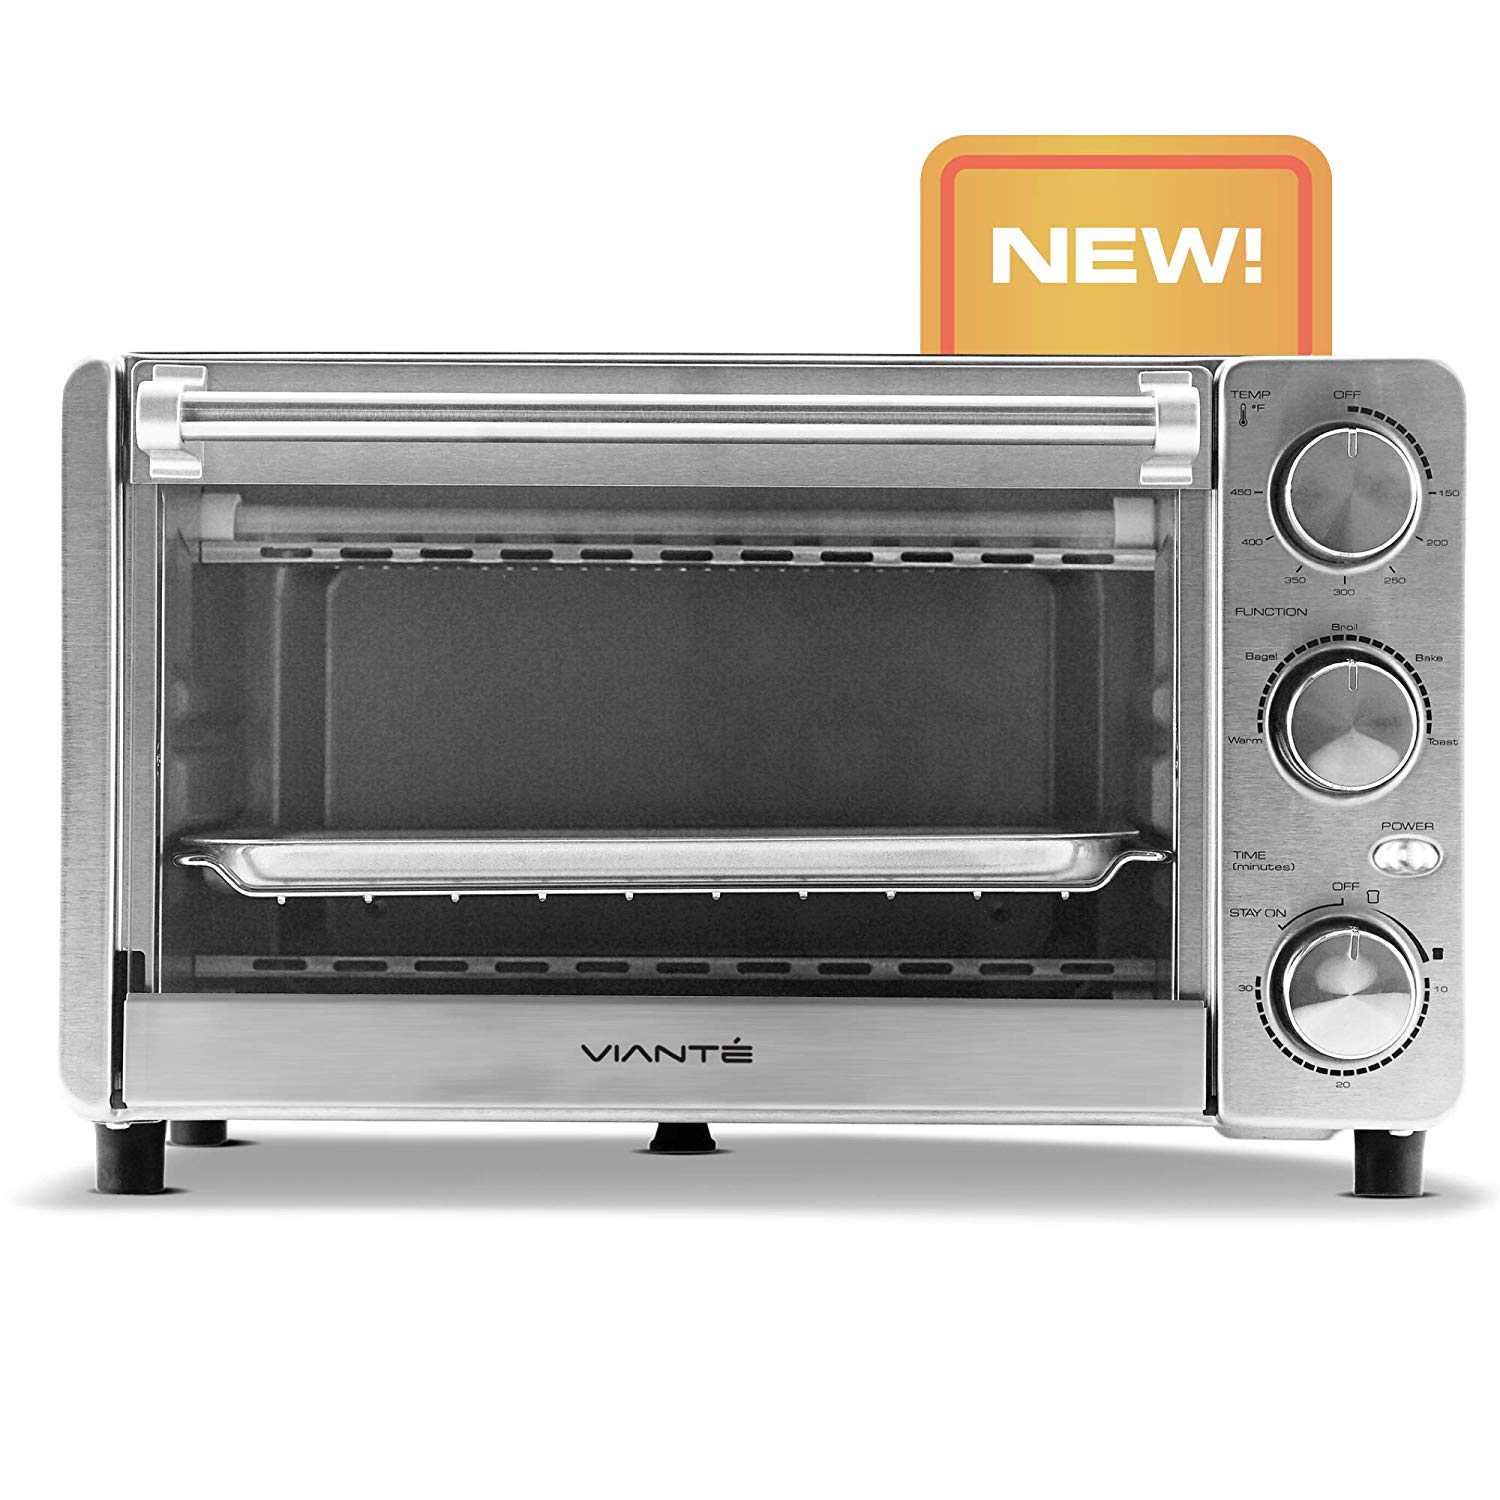 An image of Viante Stainless Steel Compact Four Slice Toaster Oven